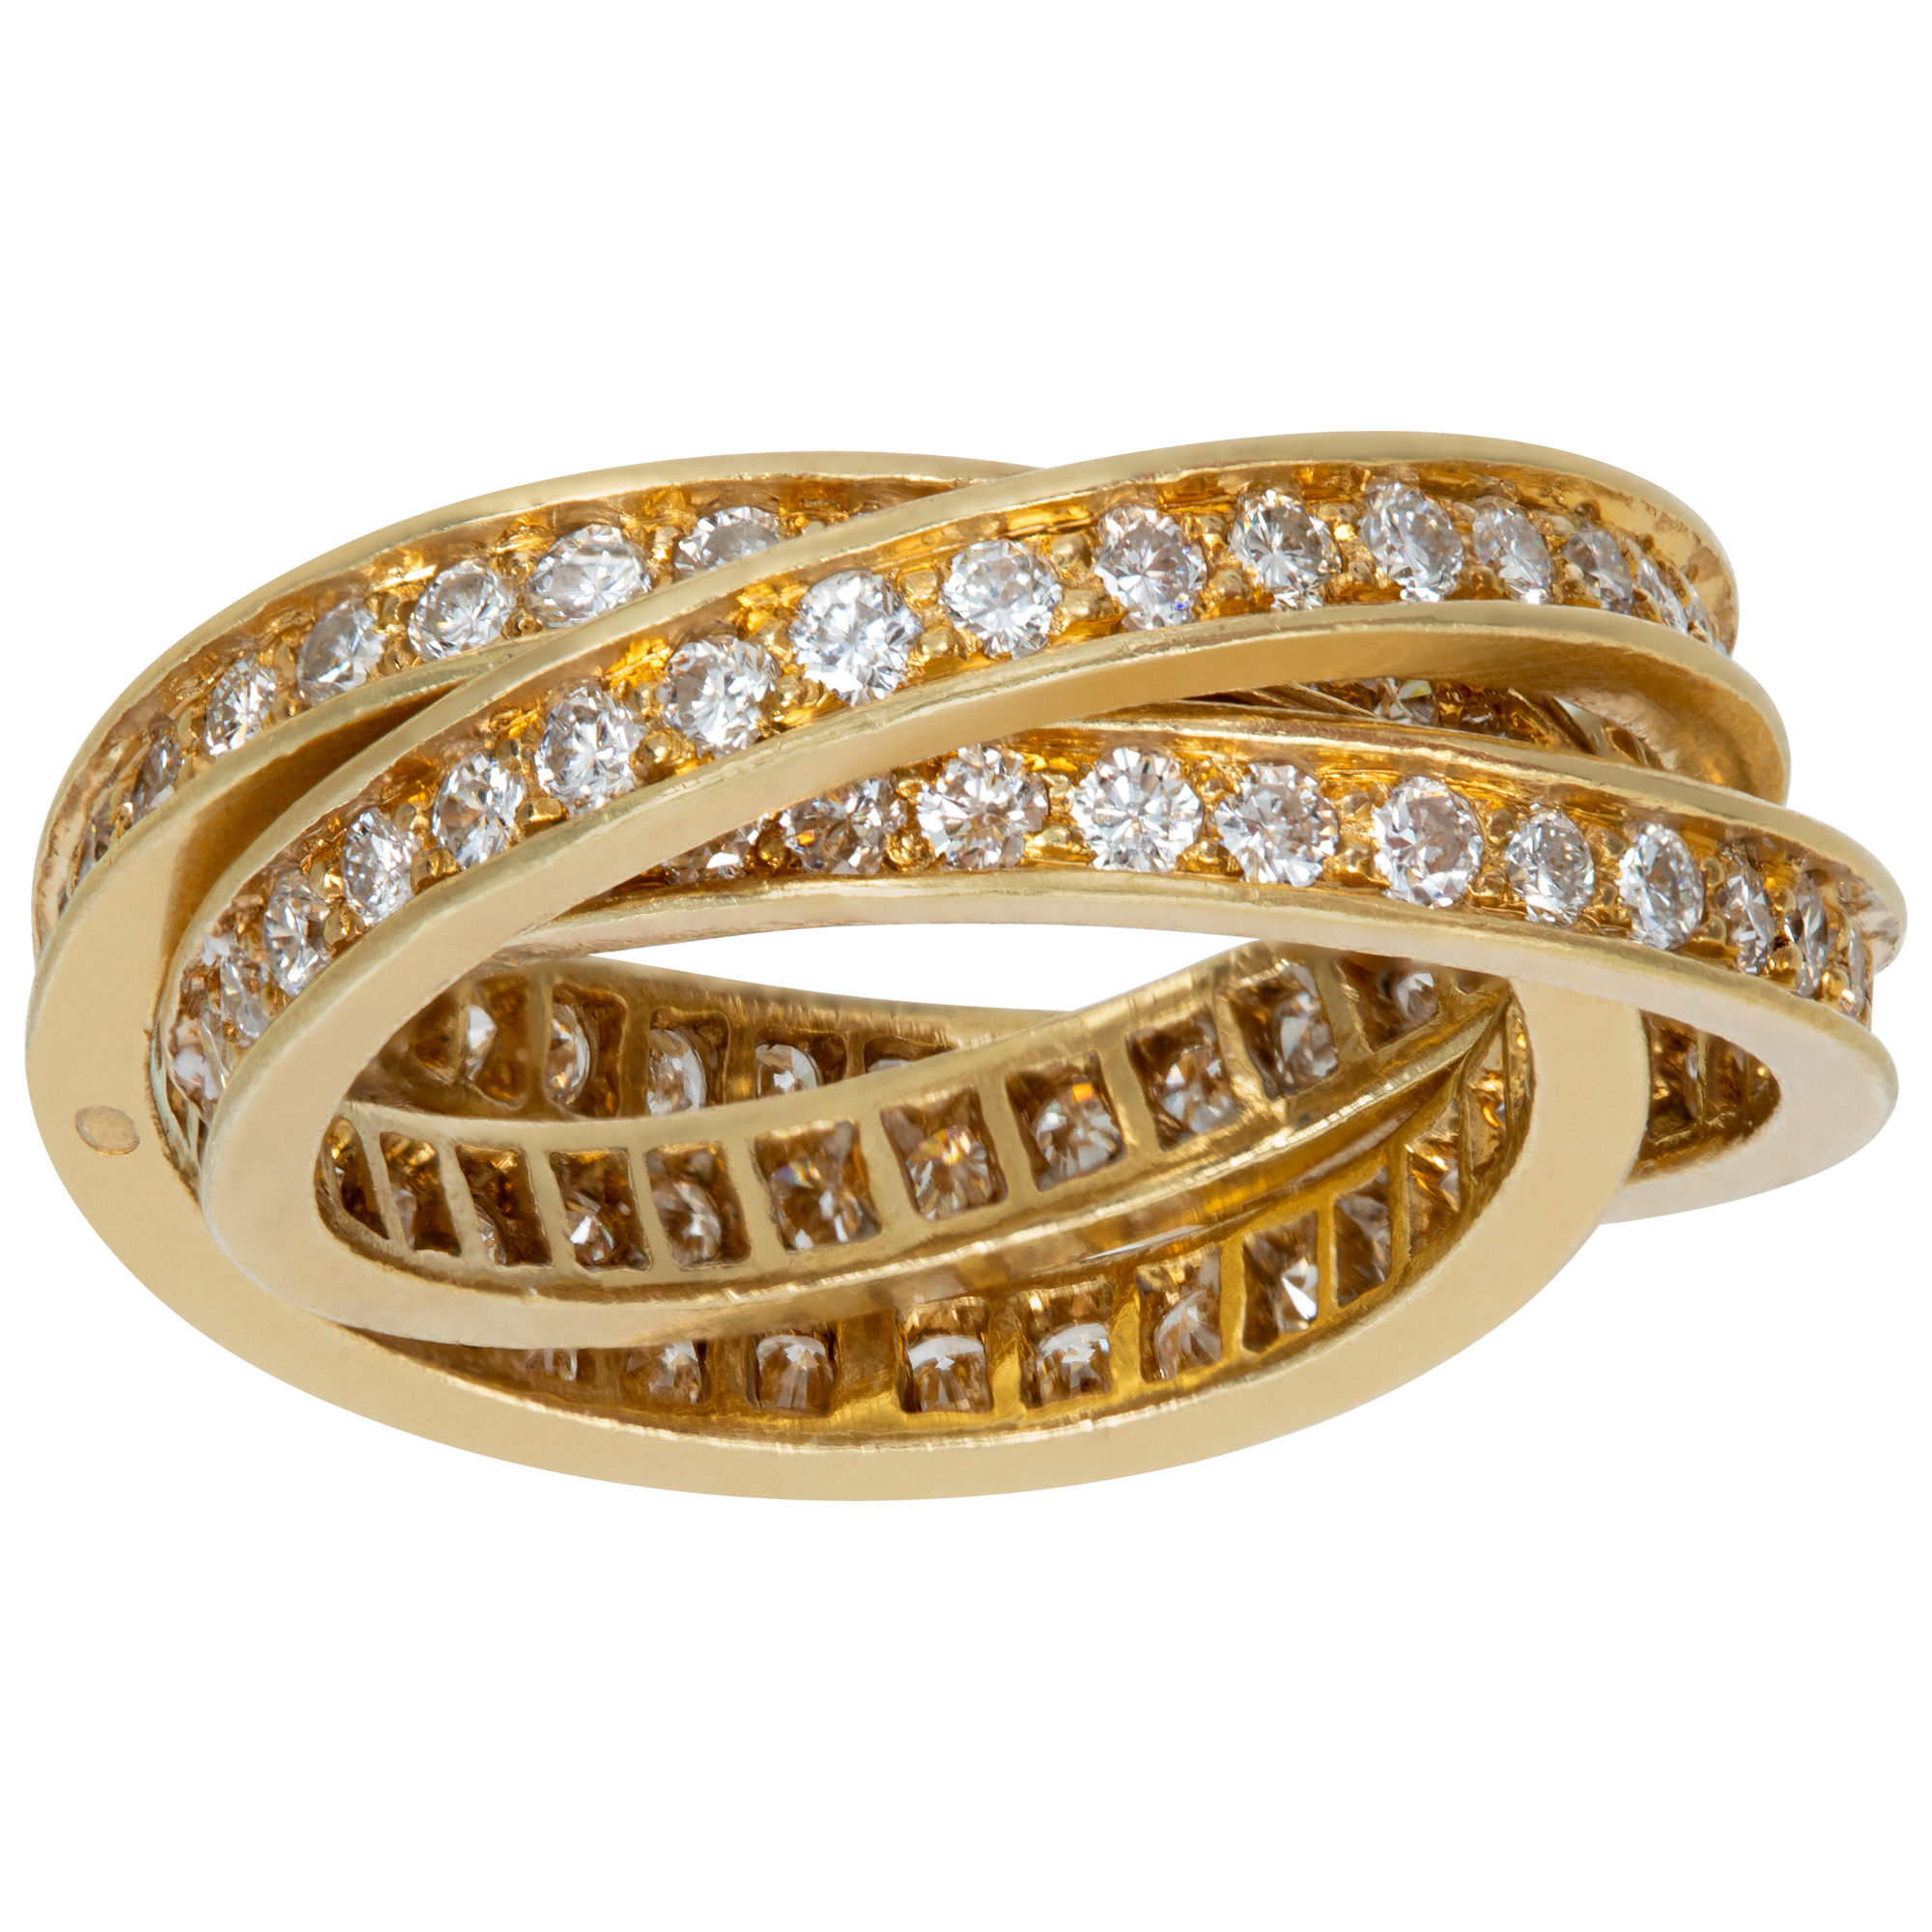 Vintage, Cartier Trinity ring with three diamonds rolling eternity bands in 18K yellow gold (Stones)